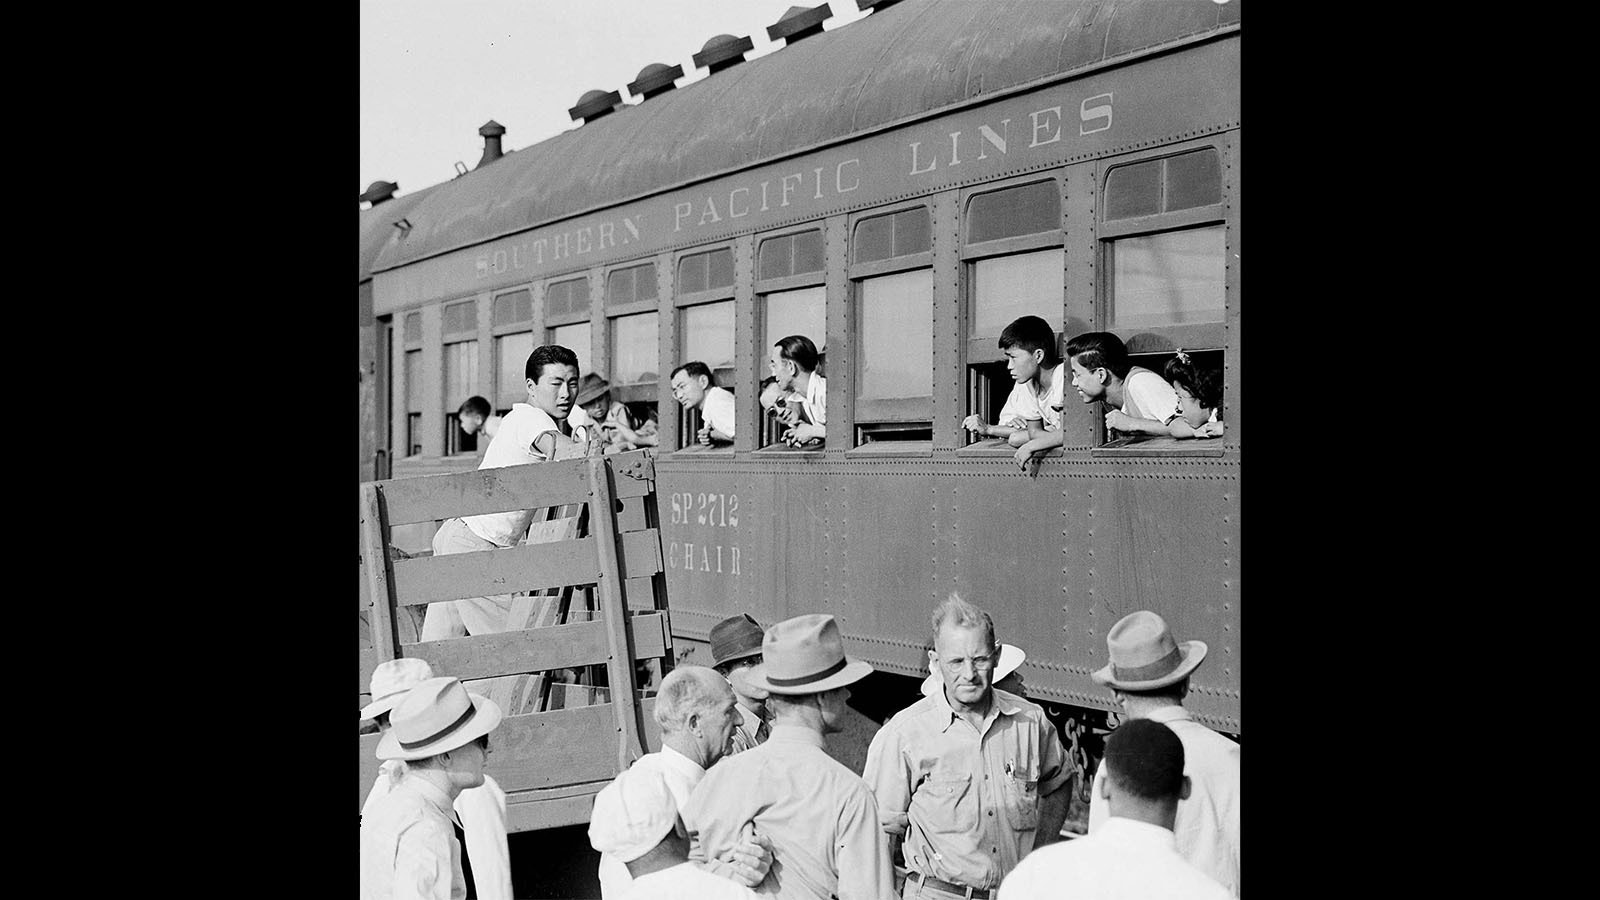 Japanese-American internees arrive by train at the Heart Mountain Relocation Center.